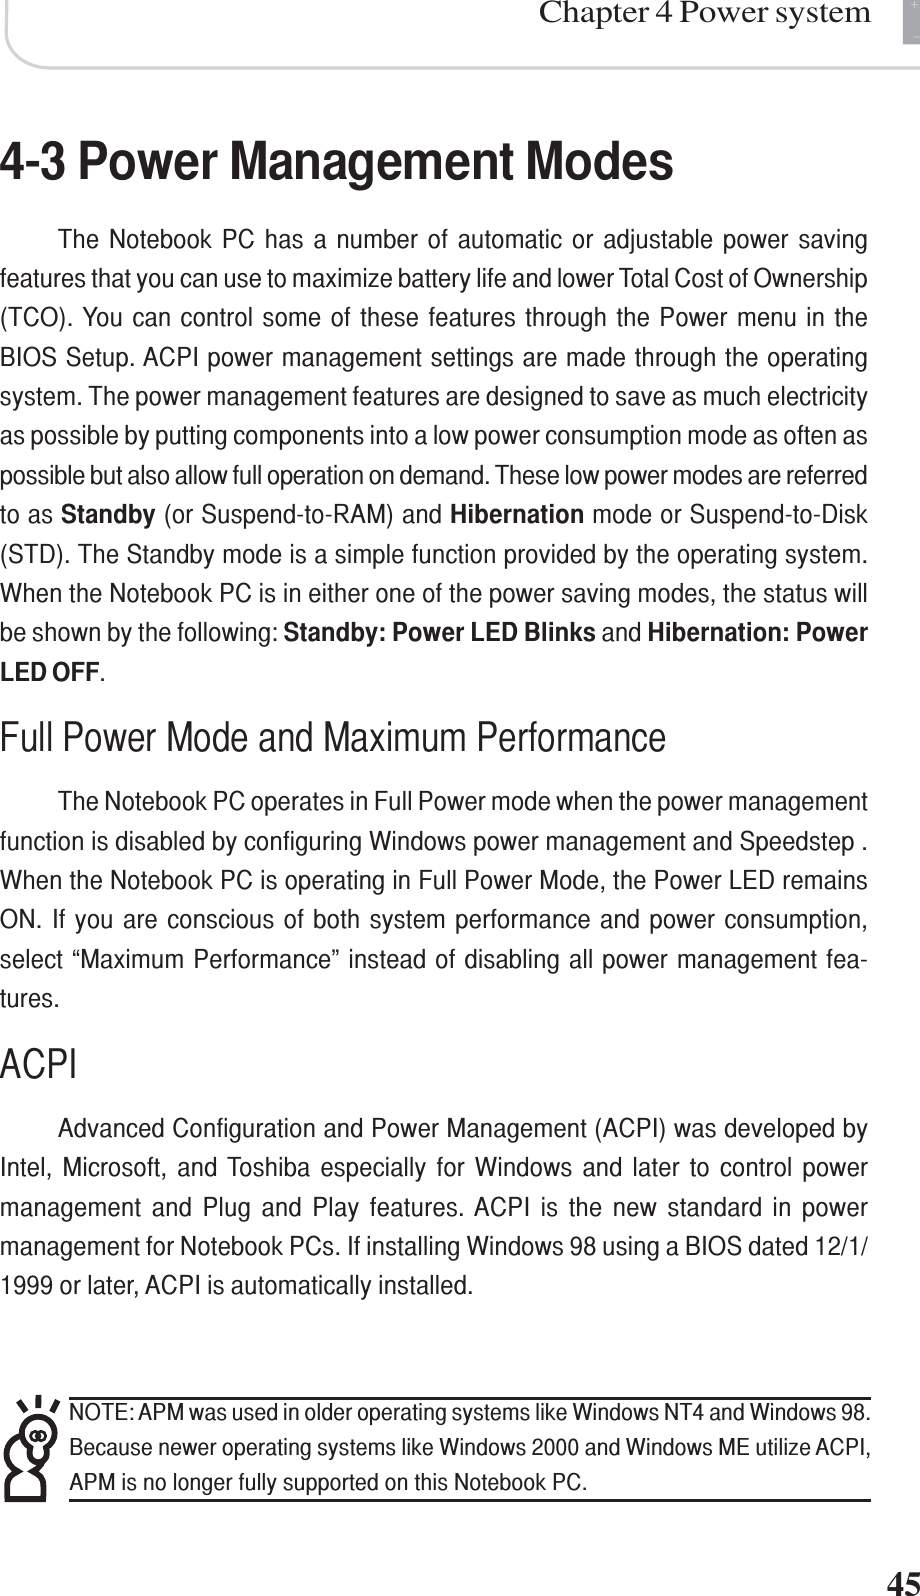 +-Chapter 4 Power system454-3 Power Management ModesThe Notebook PC has a number of automatic or adjustable power savingfeatures that you can use to maximize battery life and lower Total Cost of Ownership(TCO). You can control some of these features through the Power menu in theBIOS Setup. ACPI power management settings are made through the operatingsystem. The power management features are designed to save as much electricityas possible by putting components into a low power consumption mode as often aspossible but also allow full operation on demand. These low power modes are referredto as Standby (or Suspend-to-RAM) and Hibernation mode or Suspend-to-Disk(STD). The Standby mode is a simple function provided by the operating system.When the Notebook PC is in either one of the power saving modes, the status willbe shown by the following: Standby: Power LED Blinks and Hibernation: PowerLED OFF.Full Power Mode and Maximum PerformanceThe Notebook PC operates in Full Power mode when the power managementfunction is disabled by configuring Windows power management and Speedstep .When the Notebook PC is operating in Full Power Mode, the Power LED remainsON. If you are conscious of both system performance and power consumption,select “Maximum Performance” instead of disabling all power management fea-tures.ACPIAdvanced Configuration and Power Management (ACPI) was developed byIntel, Microsoft, and Toshiba especially for Windows and later to control powermanagement and Plug and Play features. ACPI is the new standard in powermanagement for Notebook PCs. If installing Windows 98 using a BIOS dated 12/1/1999 or later, ACPI is automatically installed.NOTE: APM was used in older operating systems like Windows NT4 and Windows 98.Because newer operating systems like Windows 2000 and Windows ME utilize ACPI,APM is no longer fully supported on this Notebook PC.